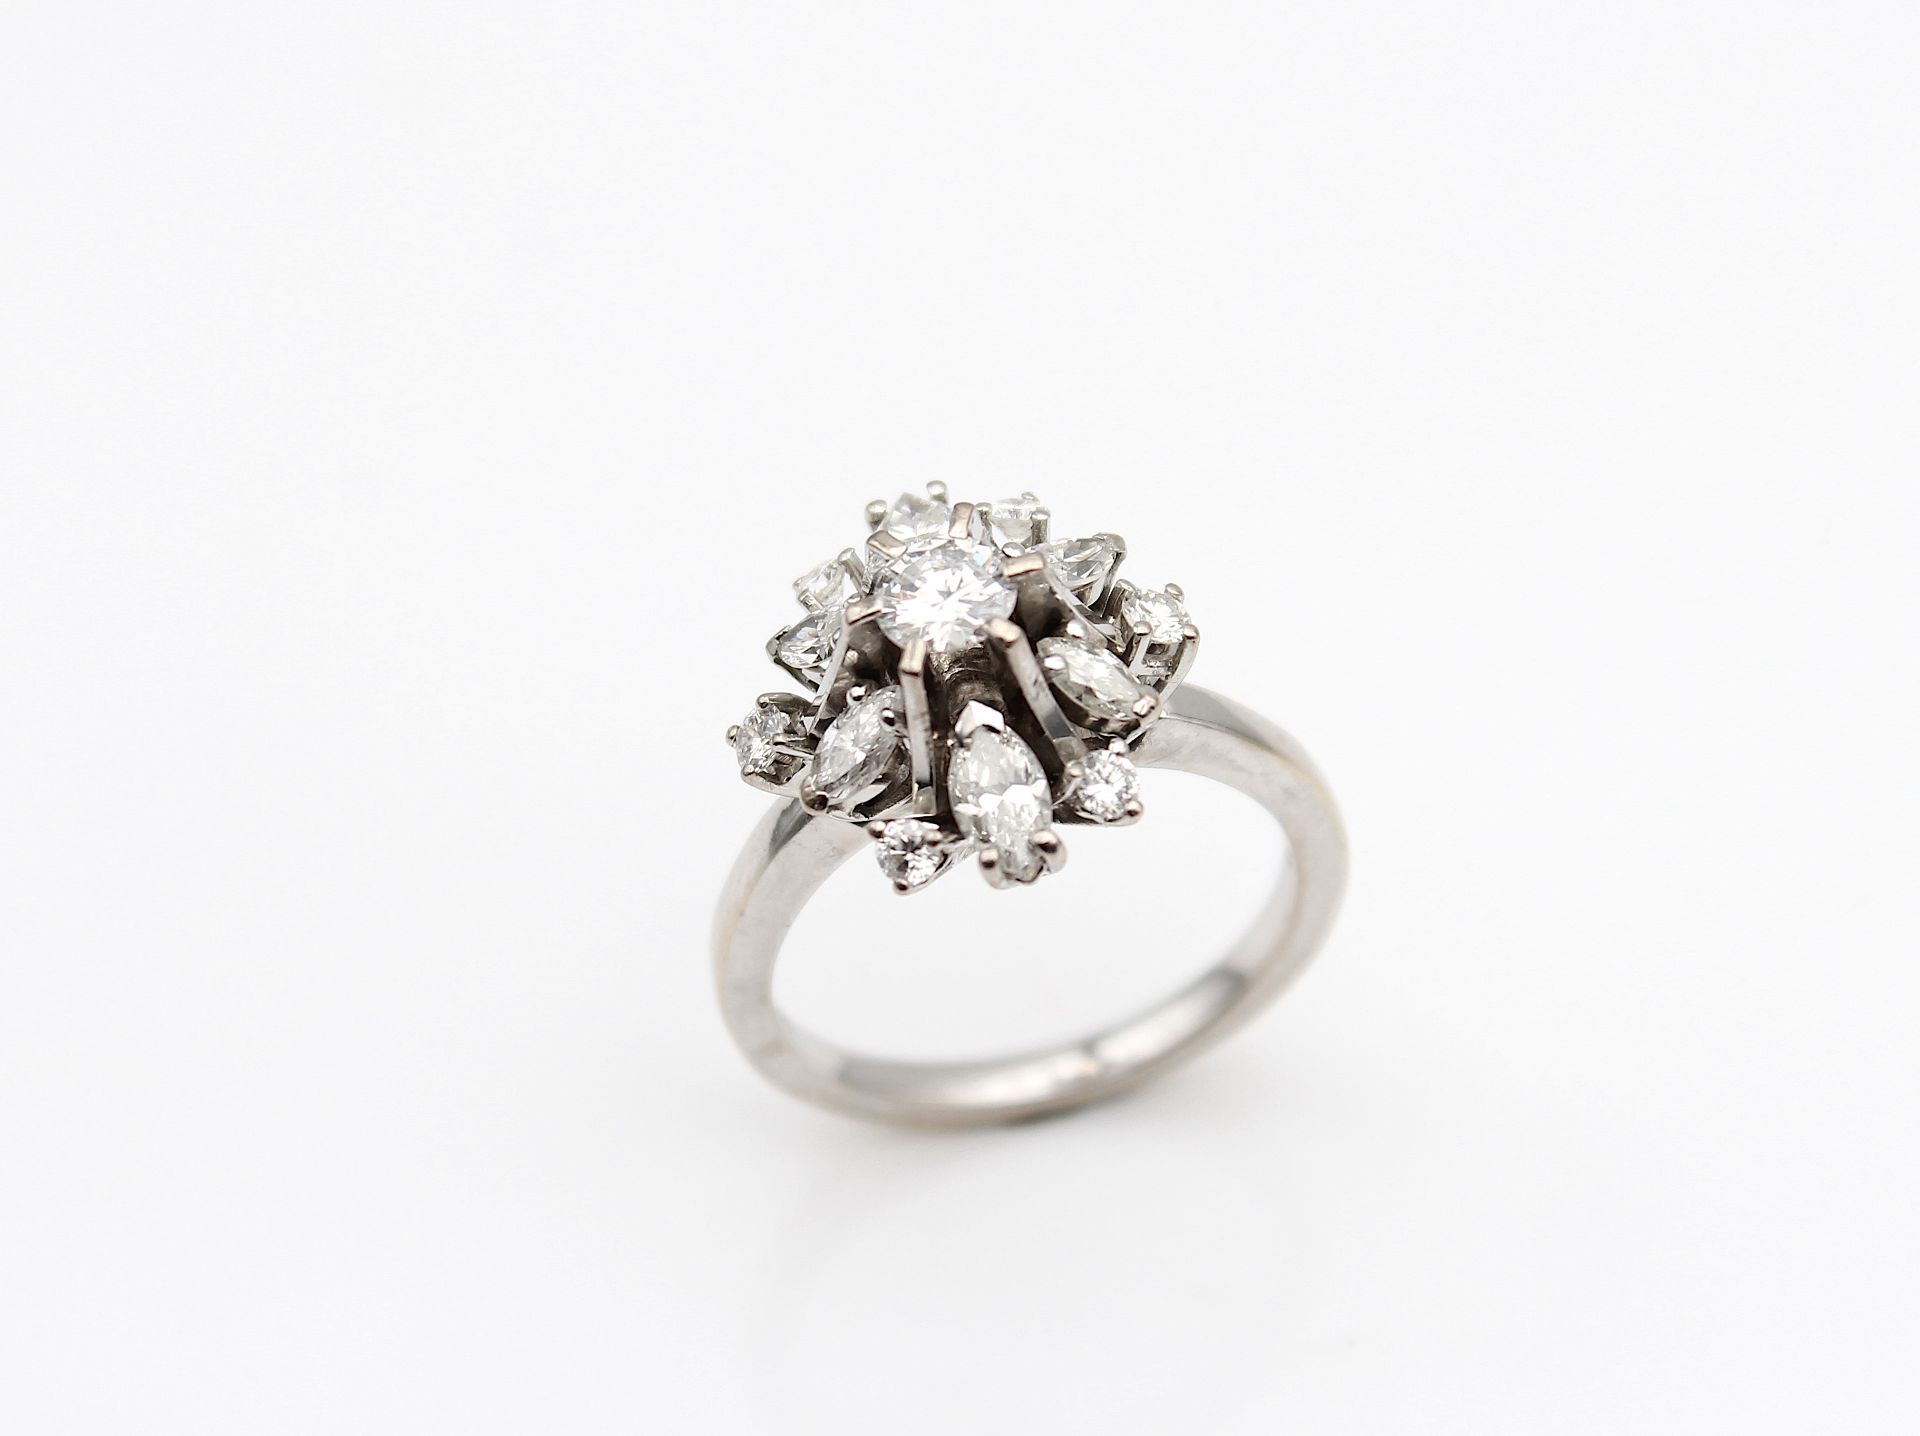 Vintage ring with diamonds and brilliants - Image 2 of 4